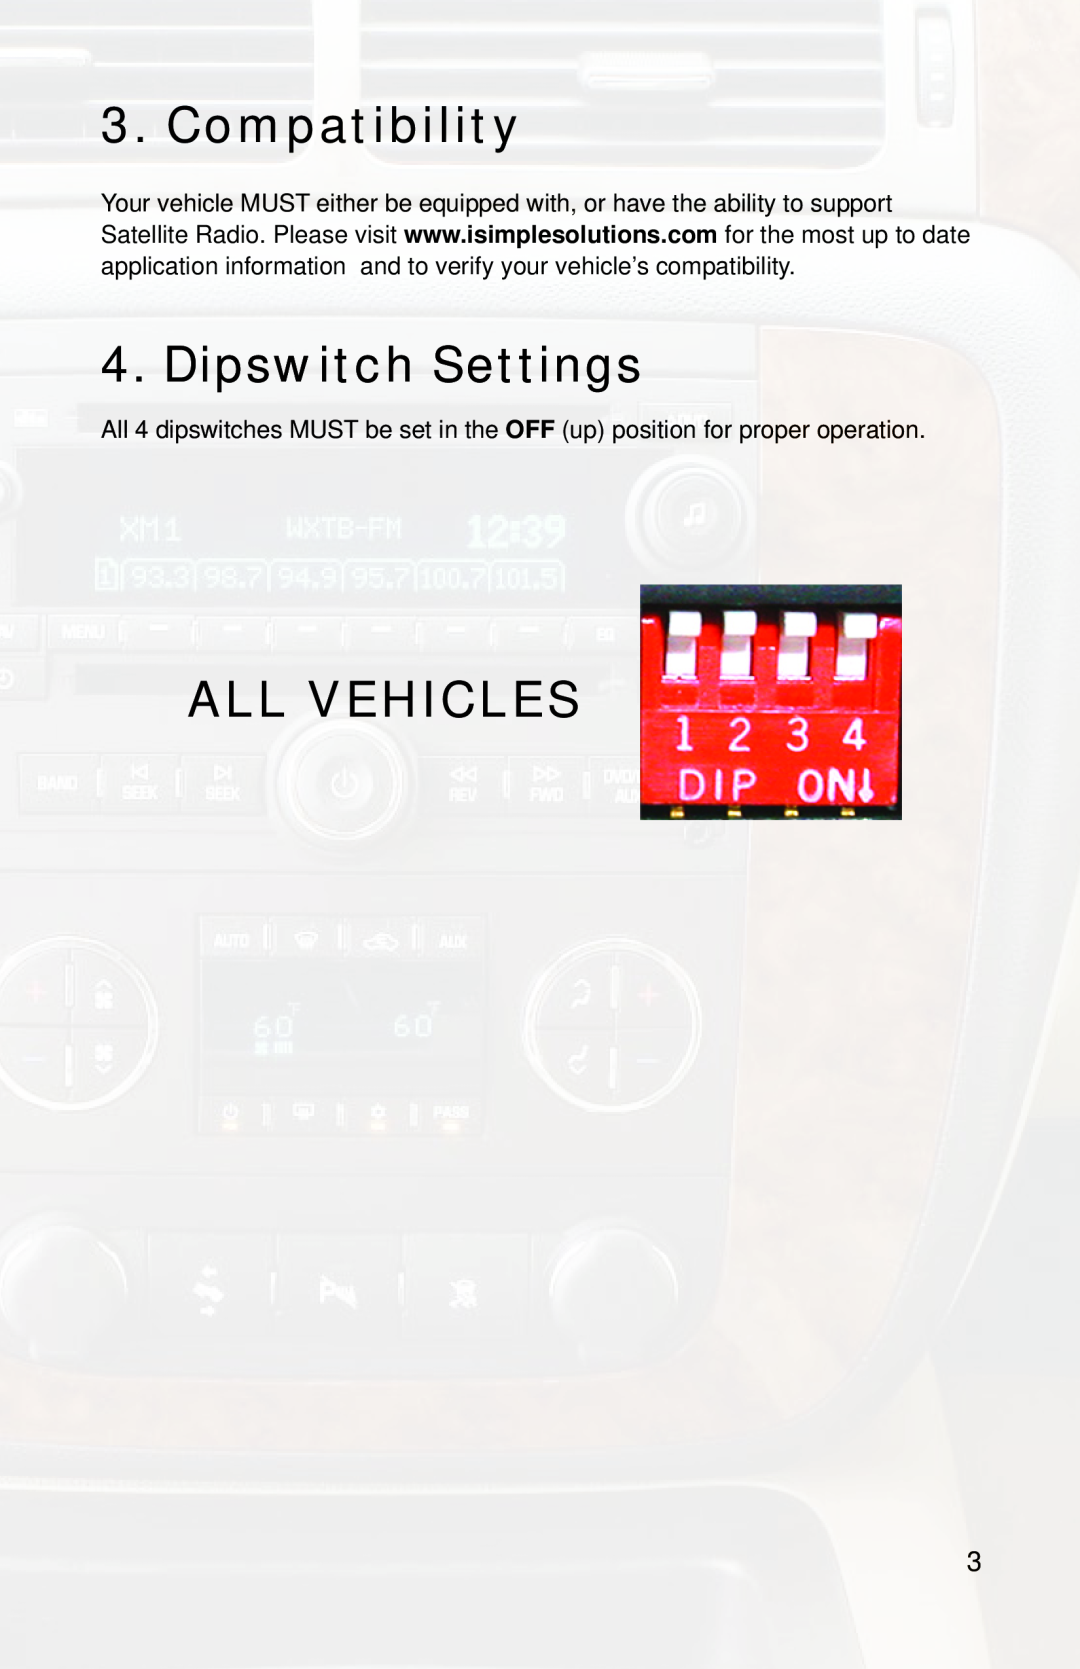 iSimple PGHGM1 owner manual Compatibility, Dipswitch Settings, All Vehicles 